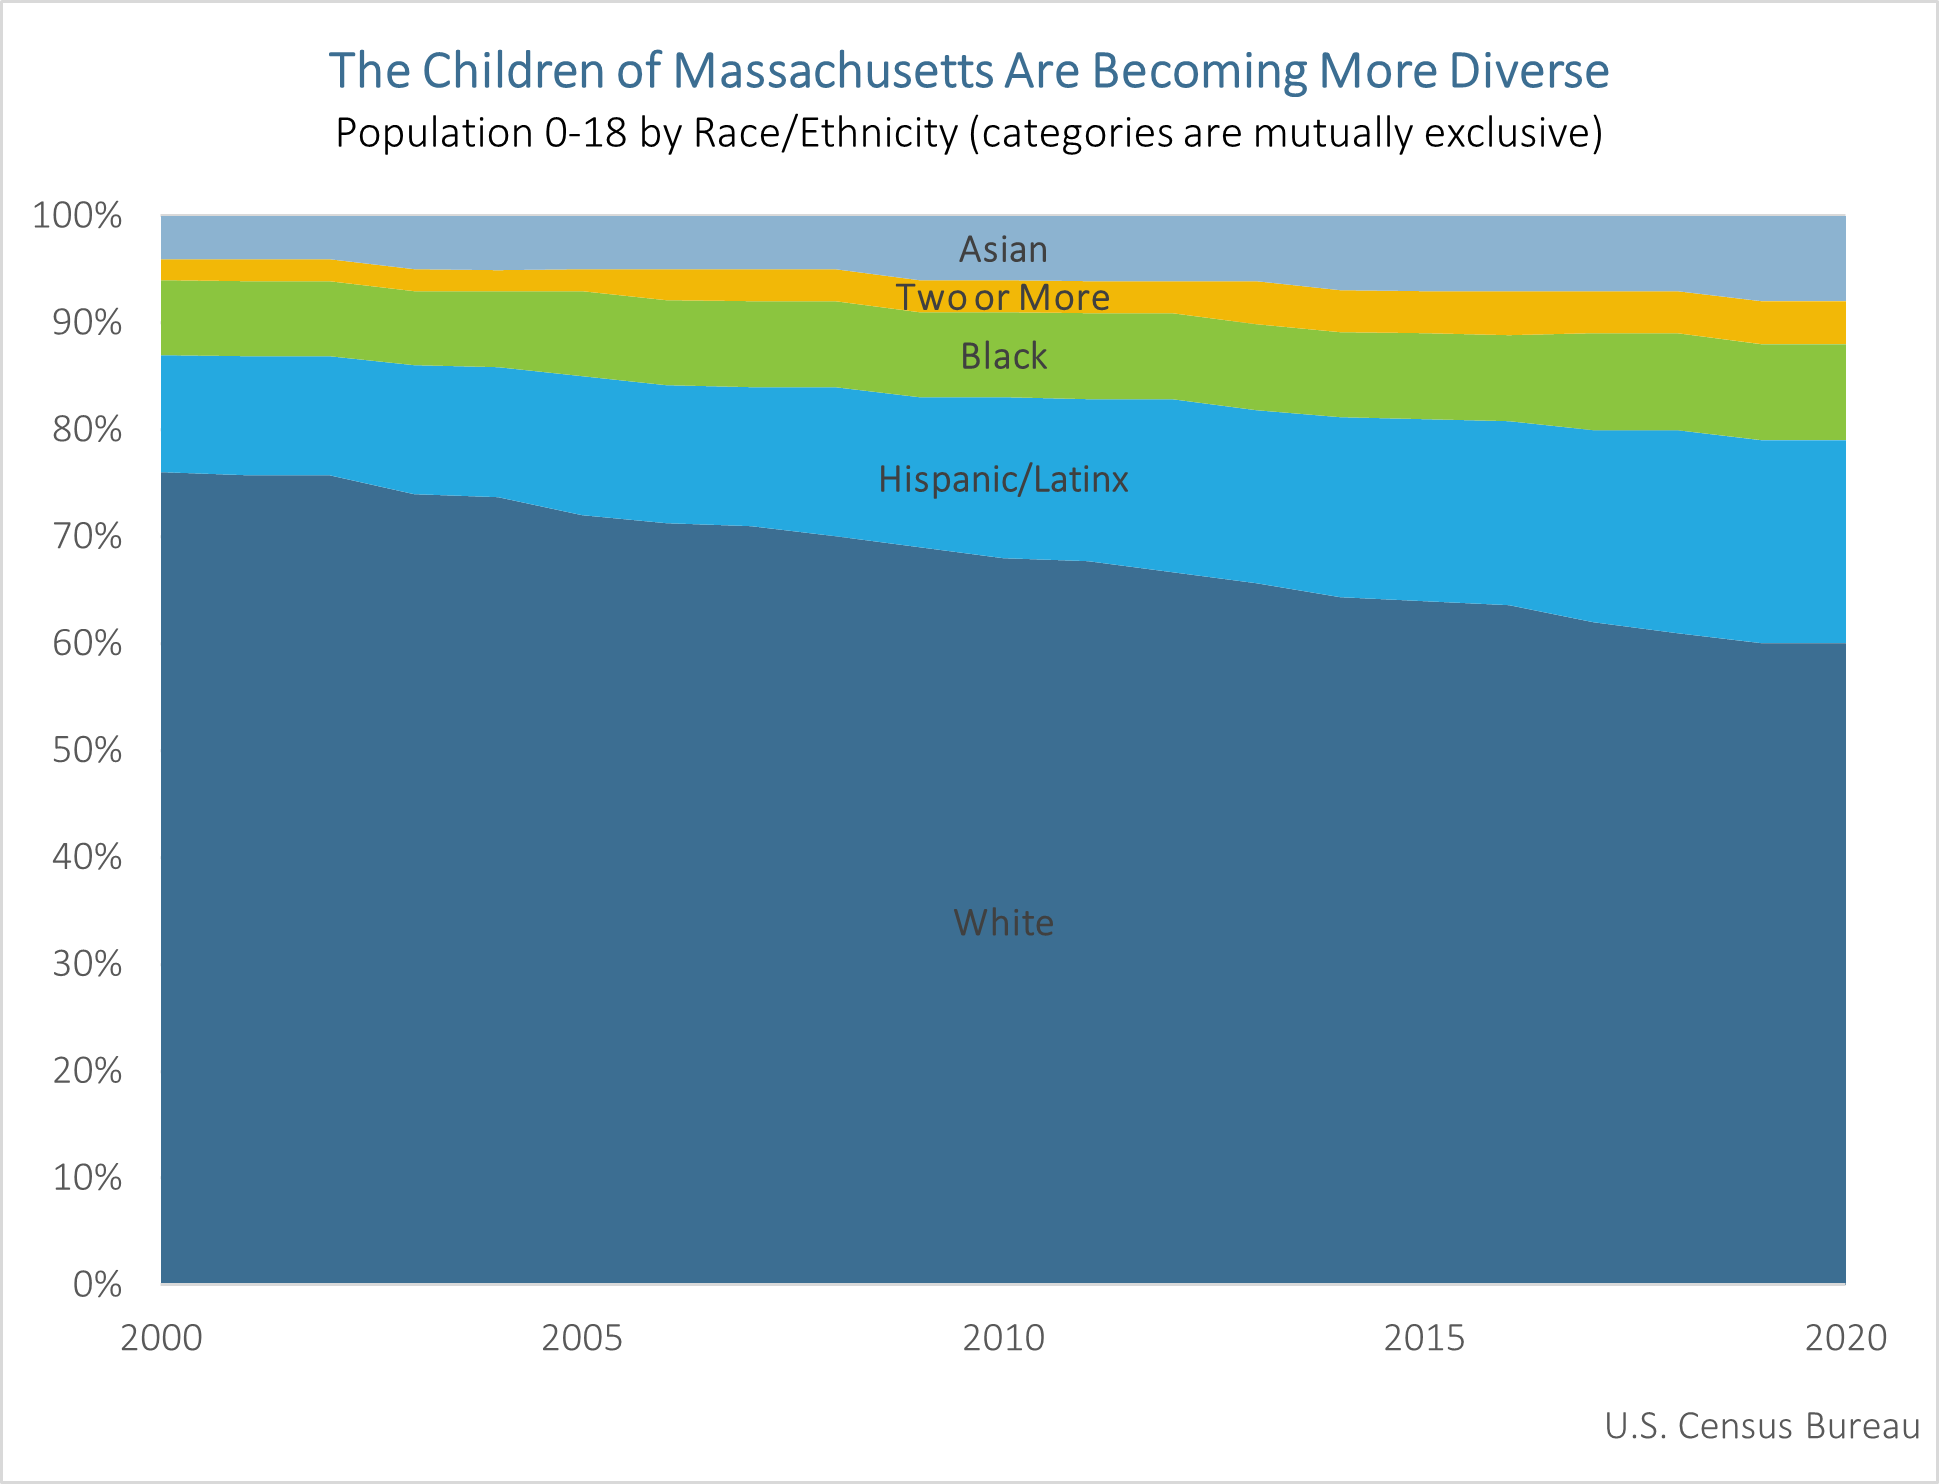 Area chart: the children of MA are becoming more diverse - age 0-18 population by race/ethnicity